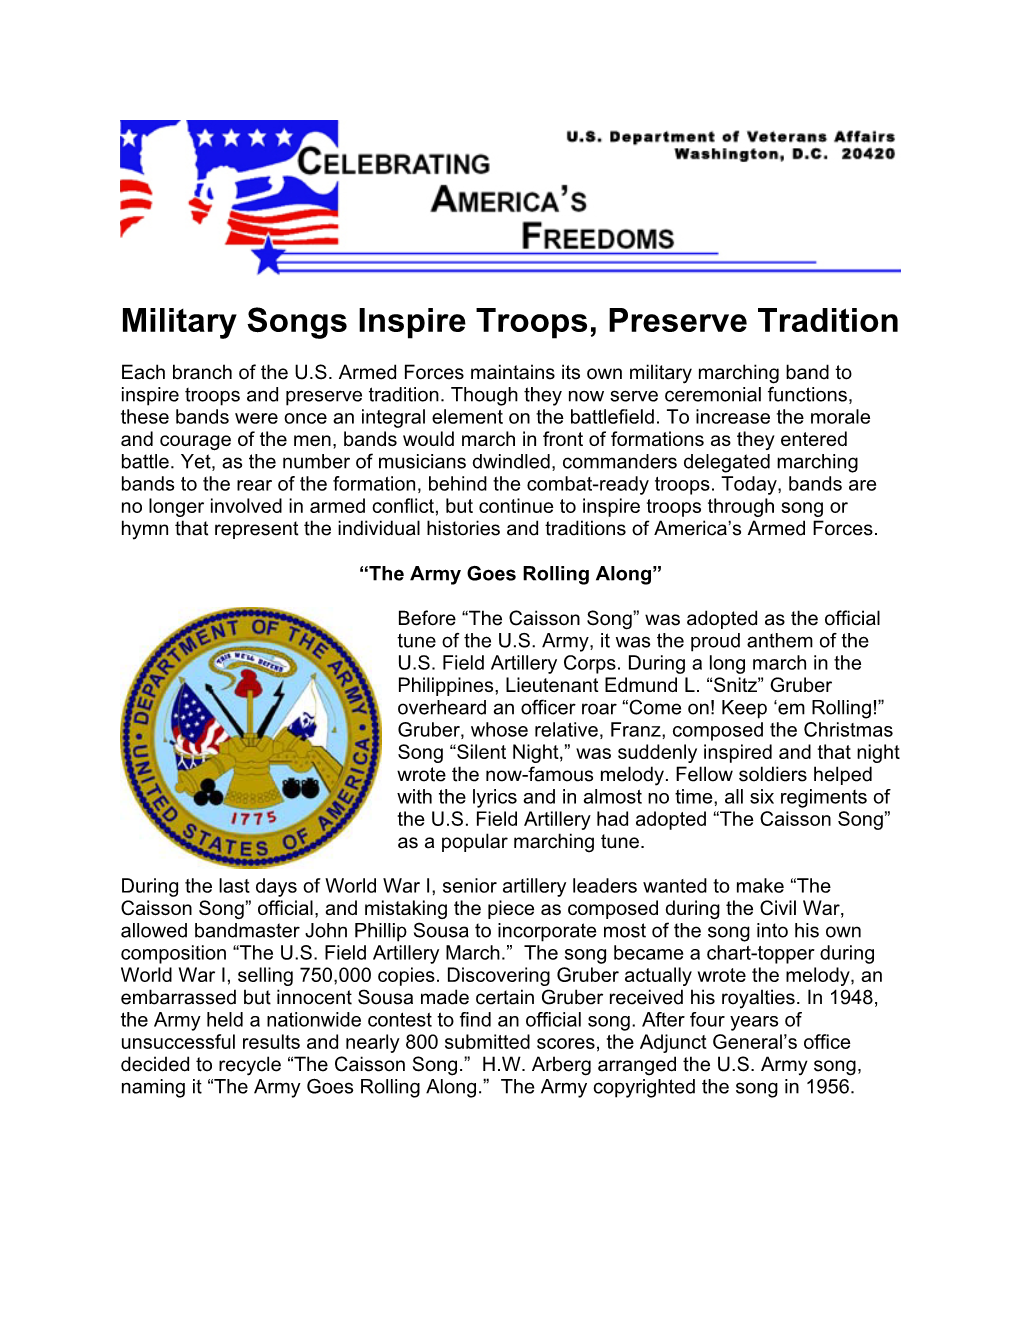 Military Songs Inspire Troops, Preserve Tradition